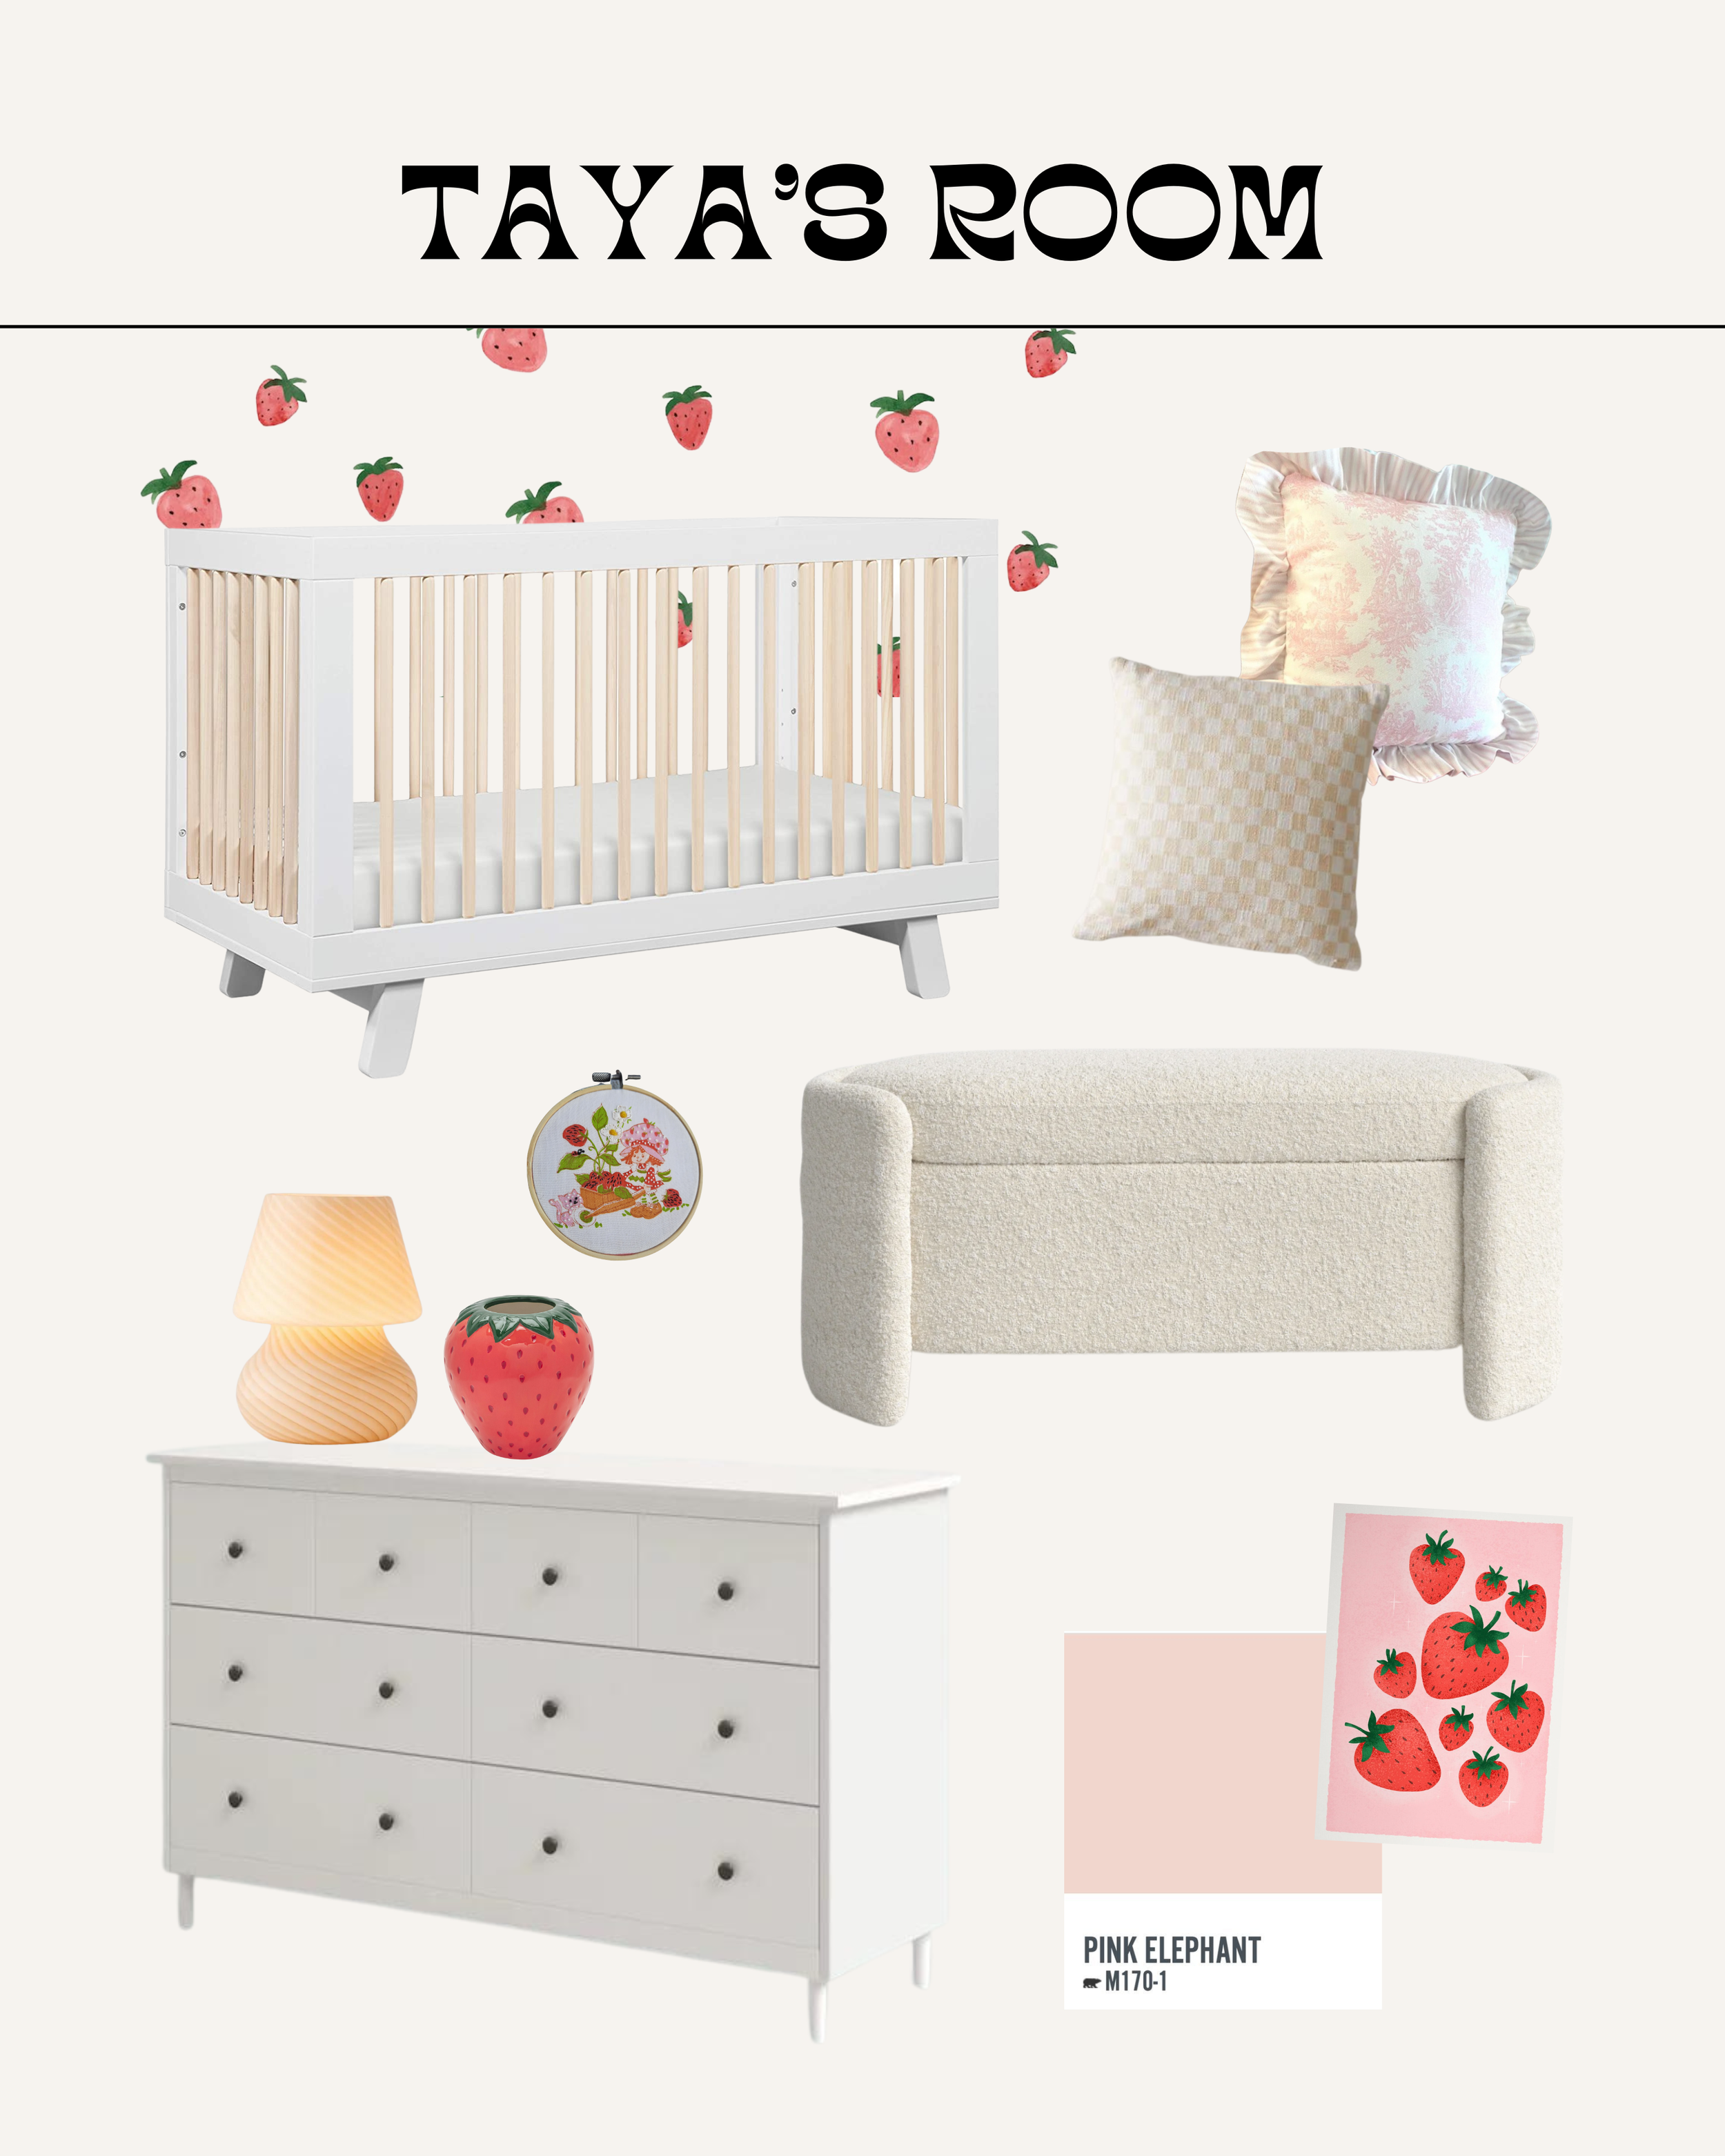 Taya's Strawberry Toddler Room, toddler bedroom, crib, babyletto, boucle toy bench, behr pink elephant pink walls, pinterest room - bresheppard.com.png